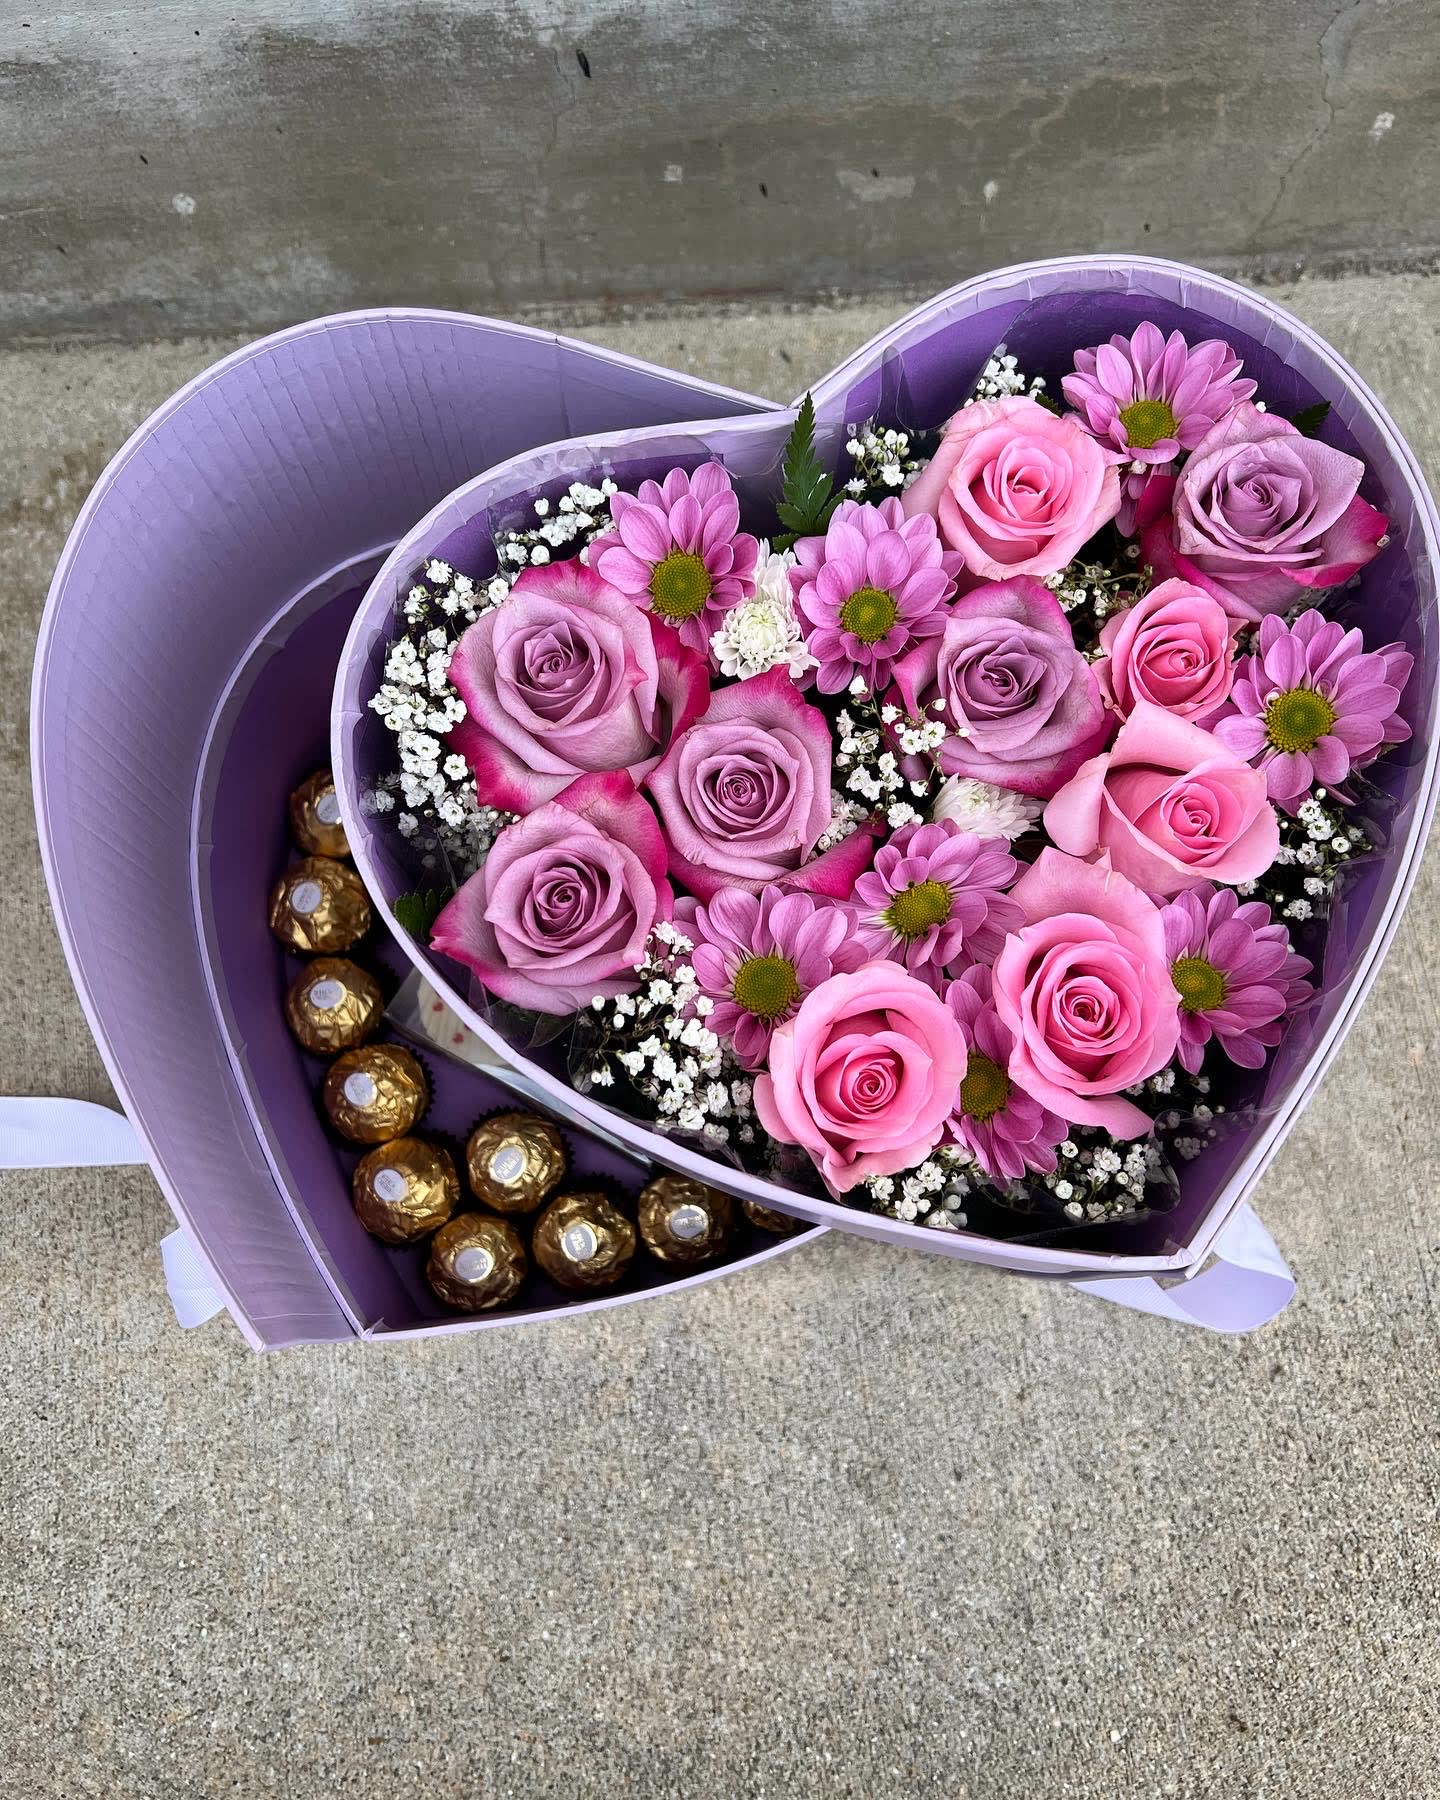 Double heart box - Two layer box, the bottom is chocolate and the top is filled with flowers in pink and purple color.